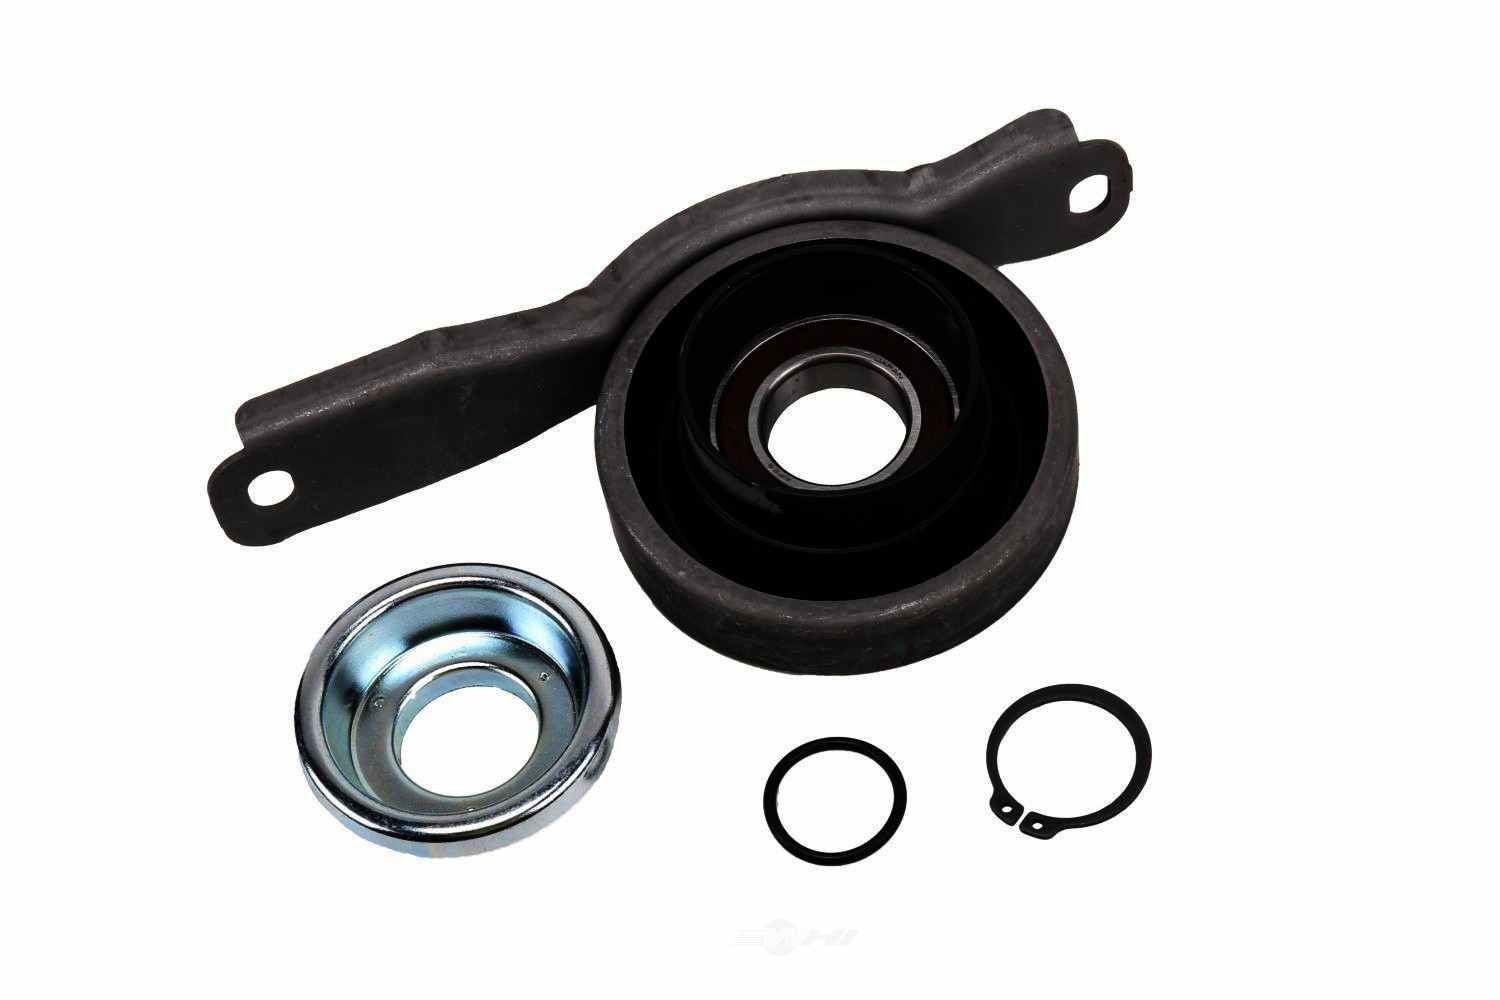 GM GENUINE PARTS CANADA - Drive Shaft Center Support Bearing - GMC 92189411